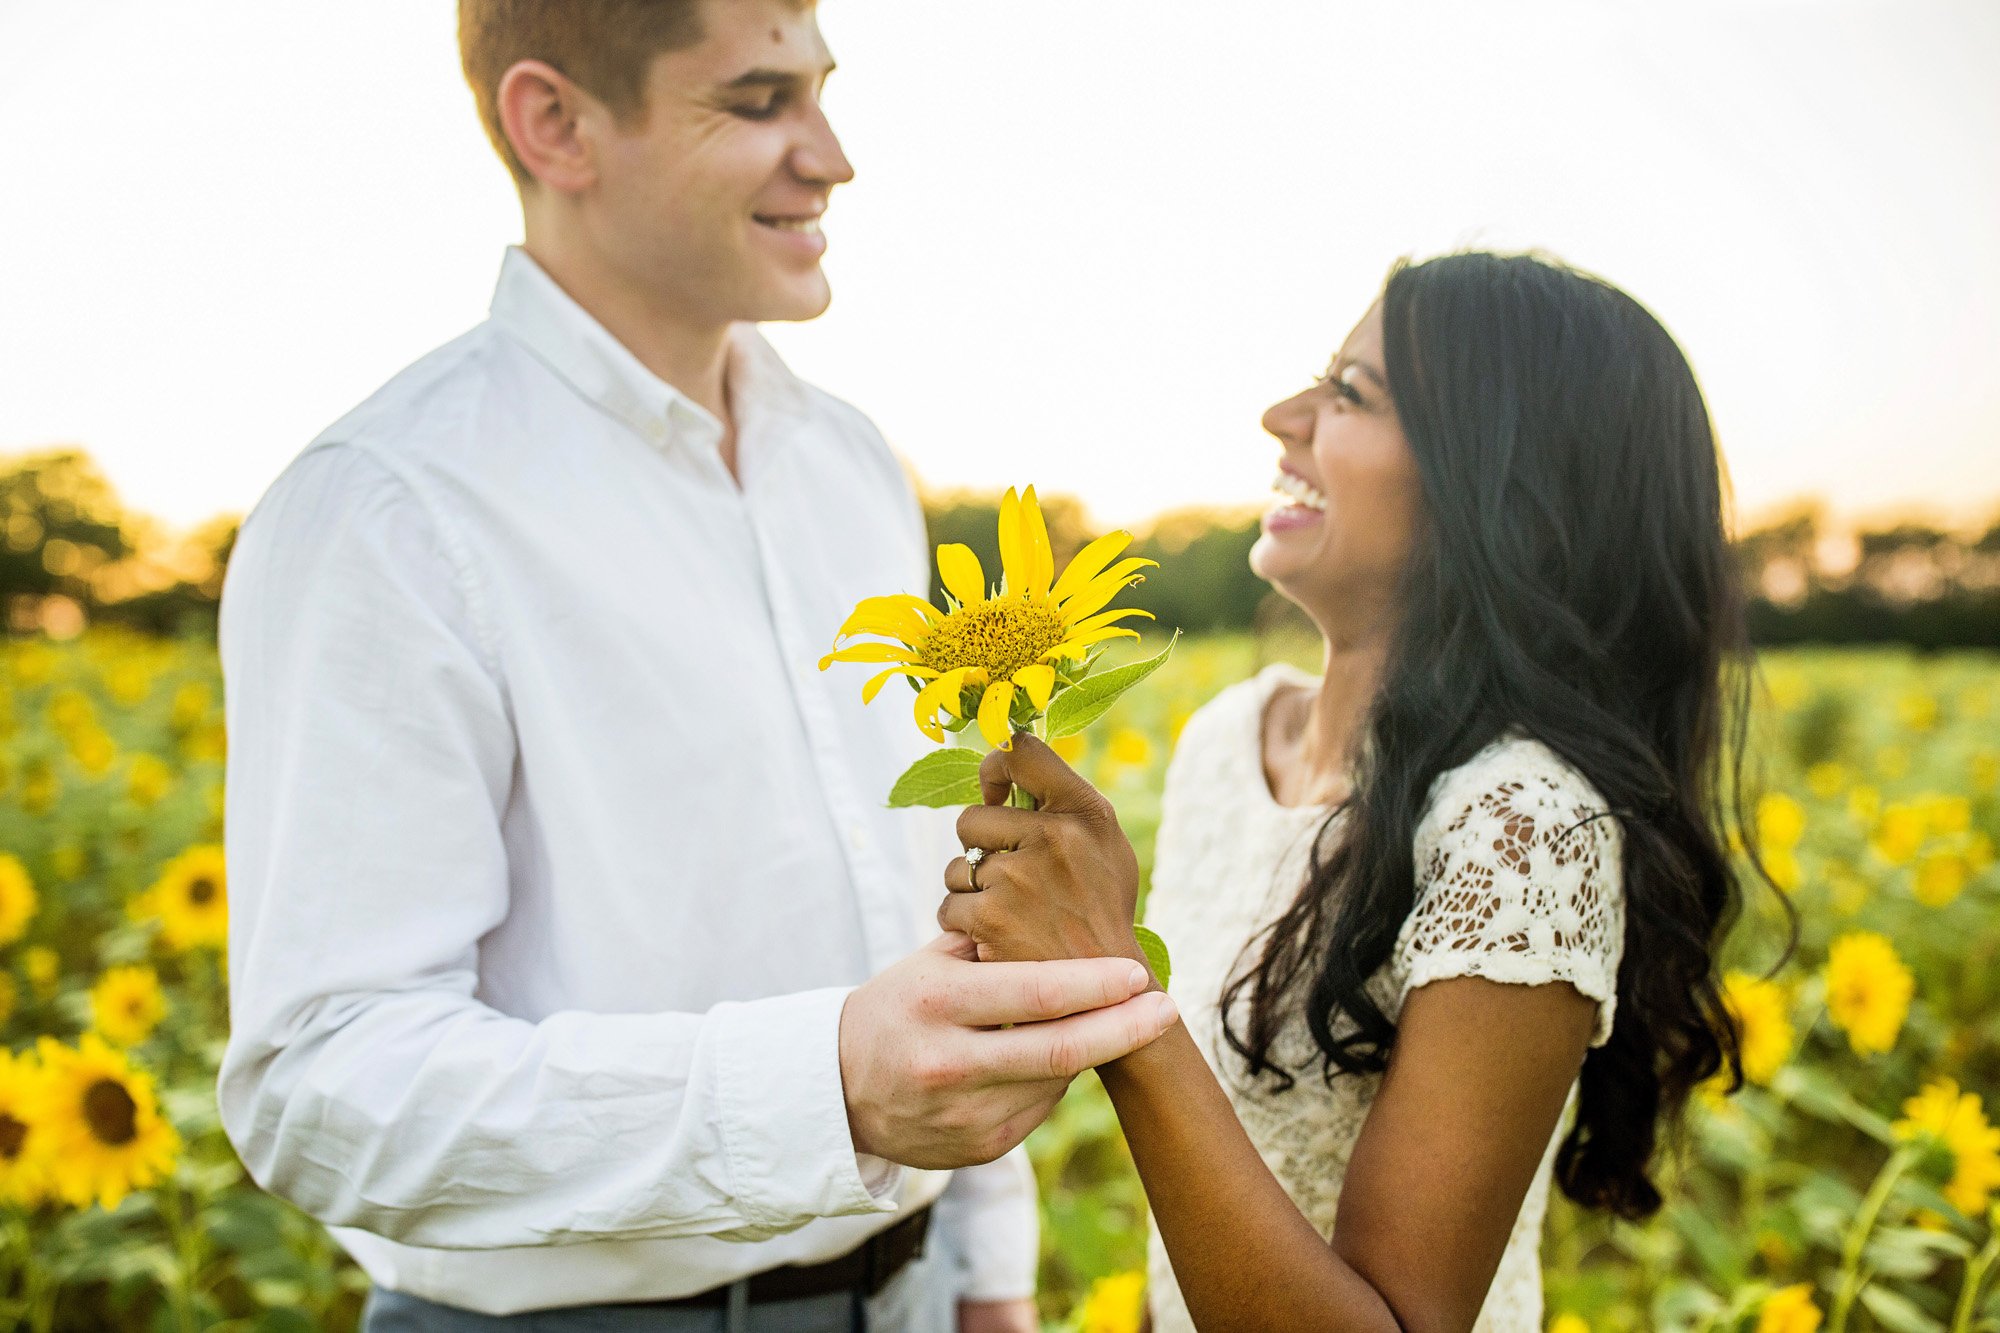 Seriously_Sabrina_Photography_Lexington_Midway_Kentucky_Engagement_Merefield_Sunflowers_Naz_and_Drew6.jpg